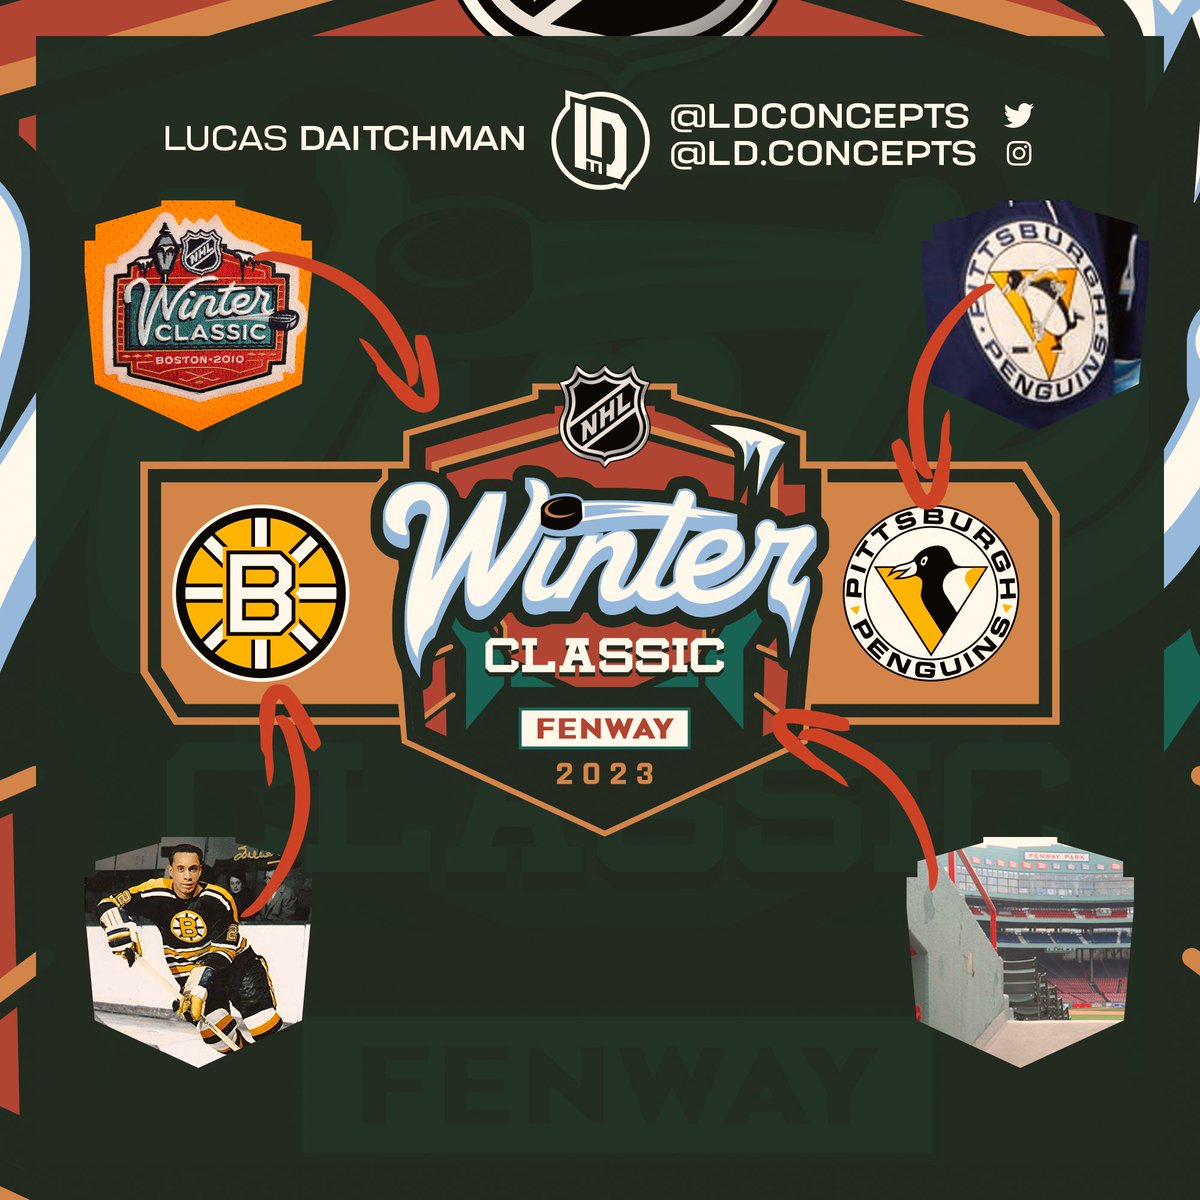 Lucas Daitchman on X: With the 2023 NHL Winter Classic coming back to  Fenway Park next winter, I put together some jersey and logo concepts for  the event. I bring back the